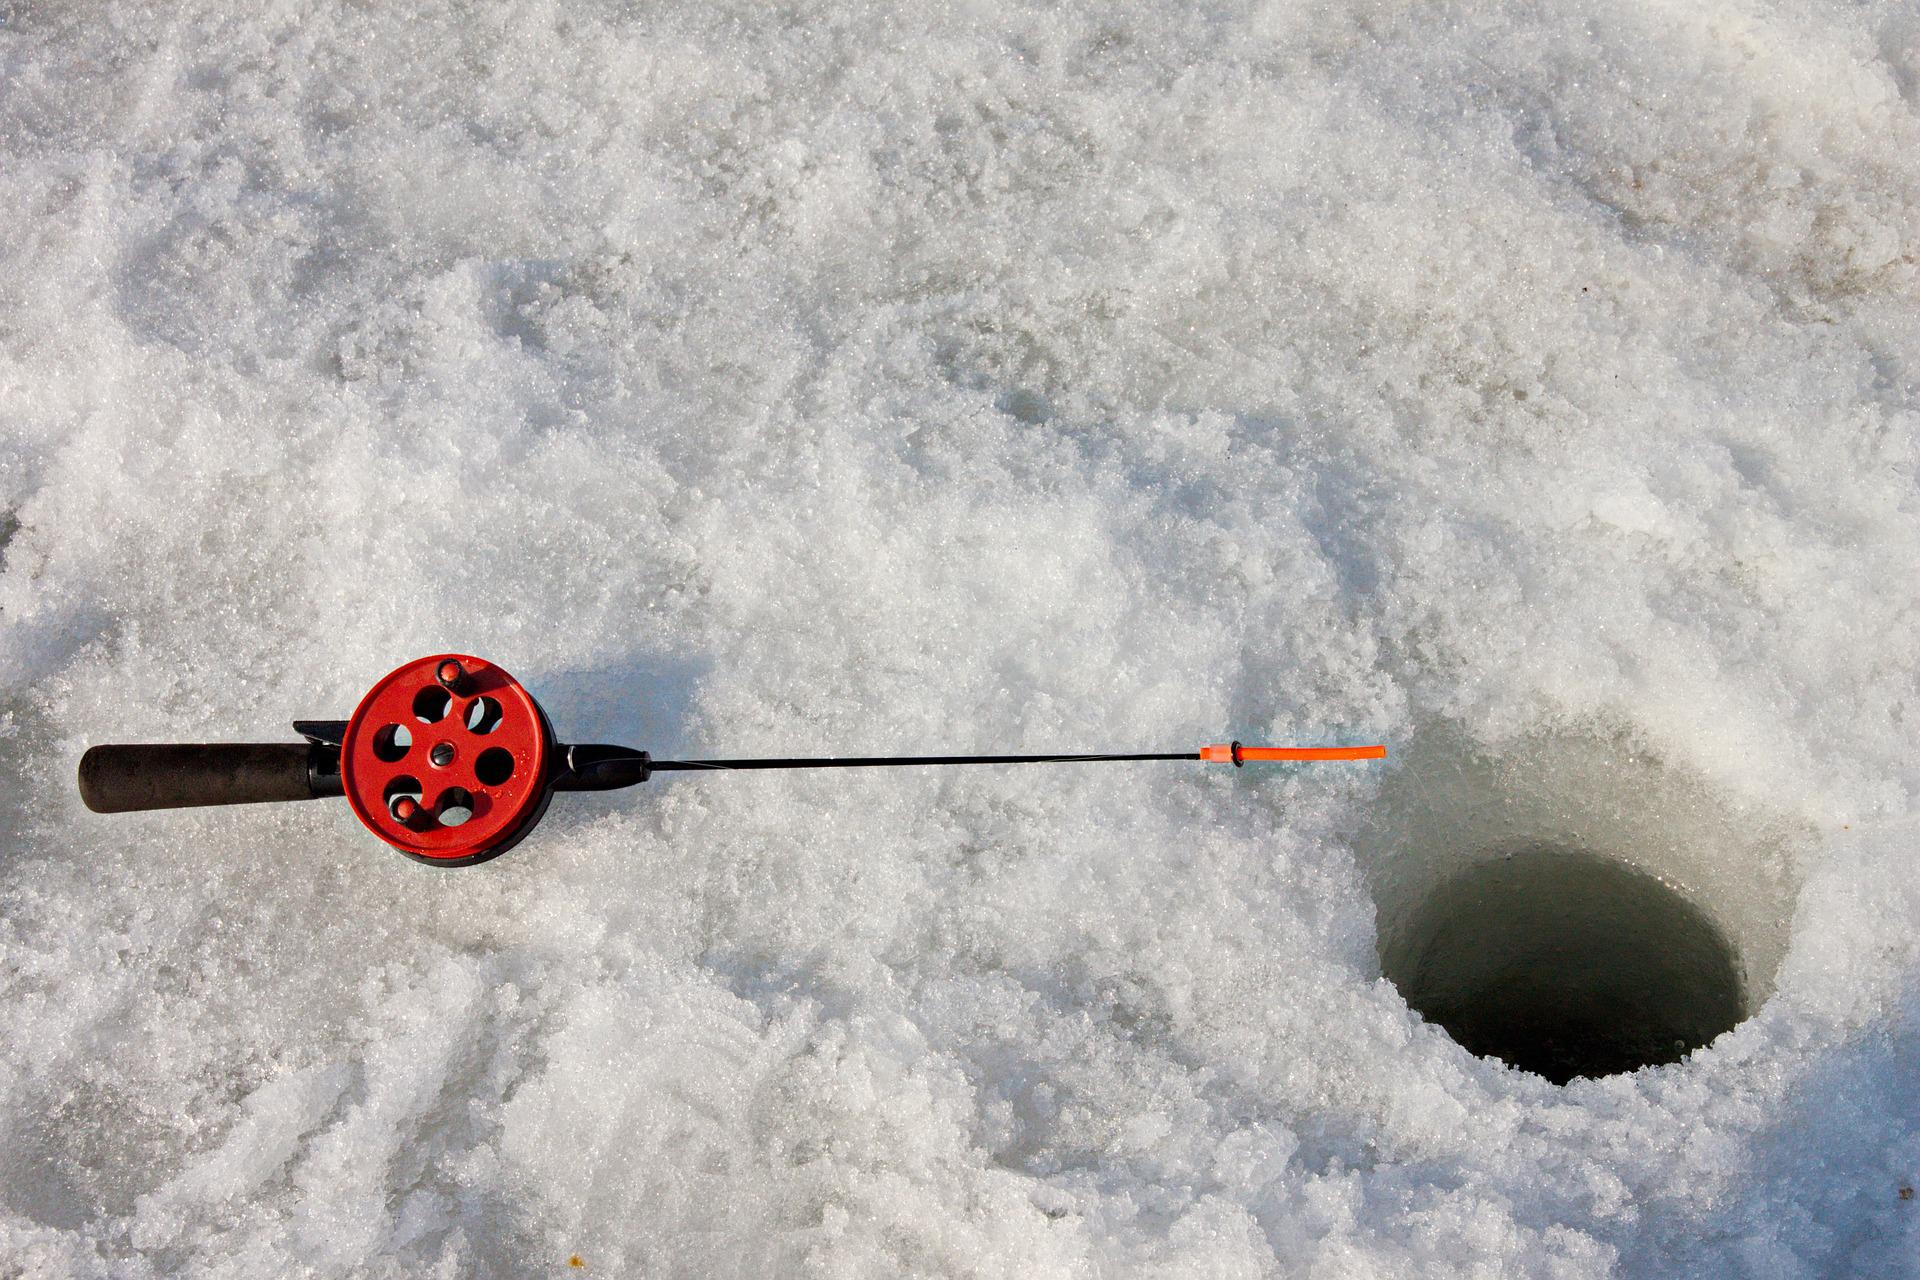 Ice Fishing Rod And Reel Master 24ultra Light